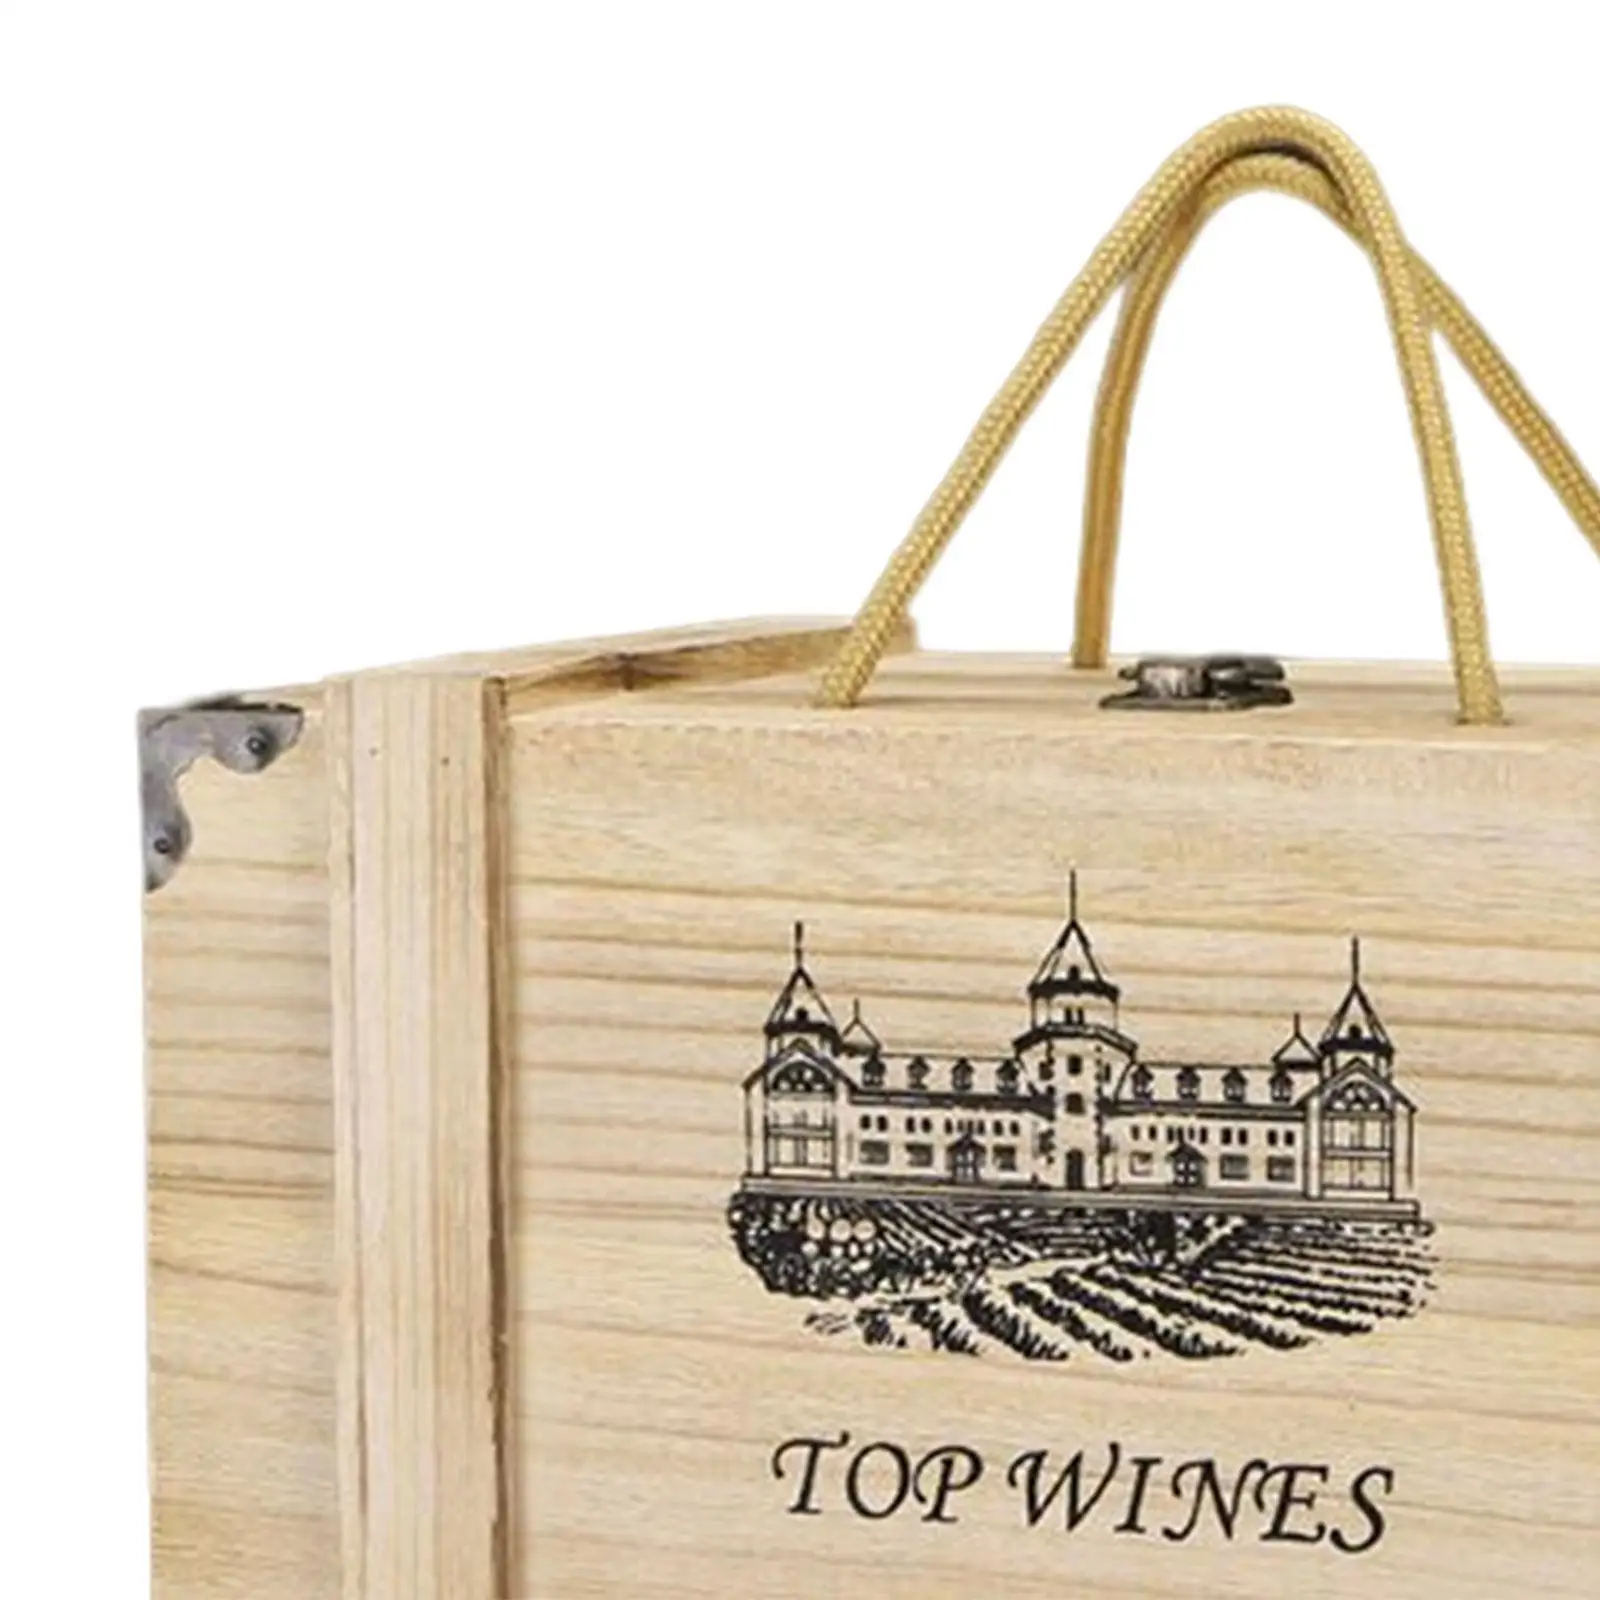 Wooden Wine Box Metal Buckle Lock 6 Bottled Wine Gift Boxes Occassions